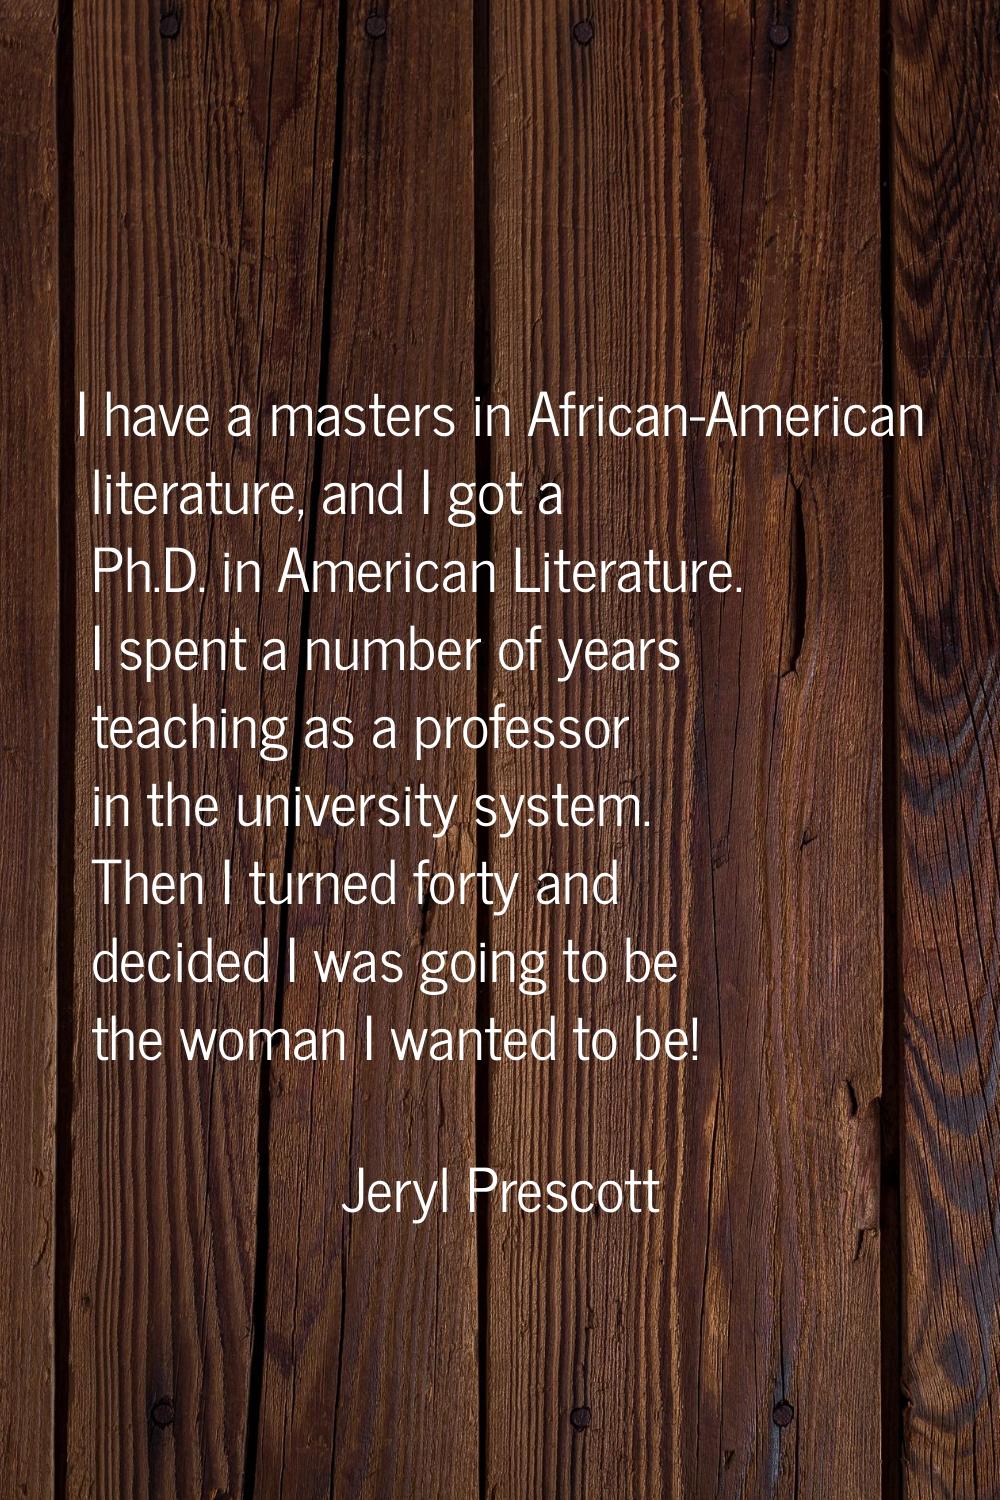 I have a masters in African-American literature, and I got a Ph.D. in American Literature. I spent 